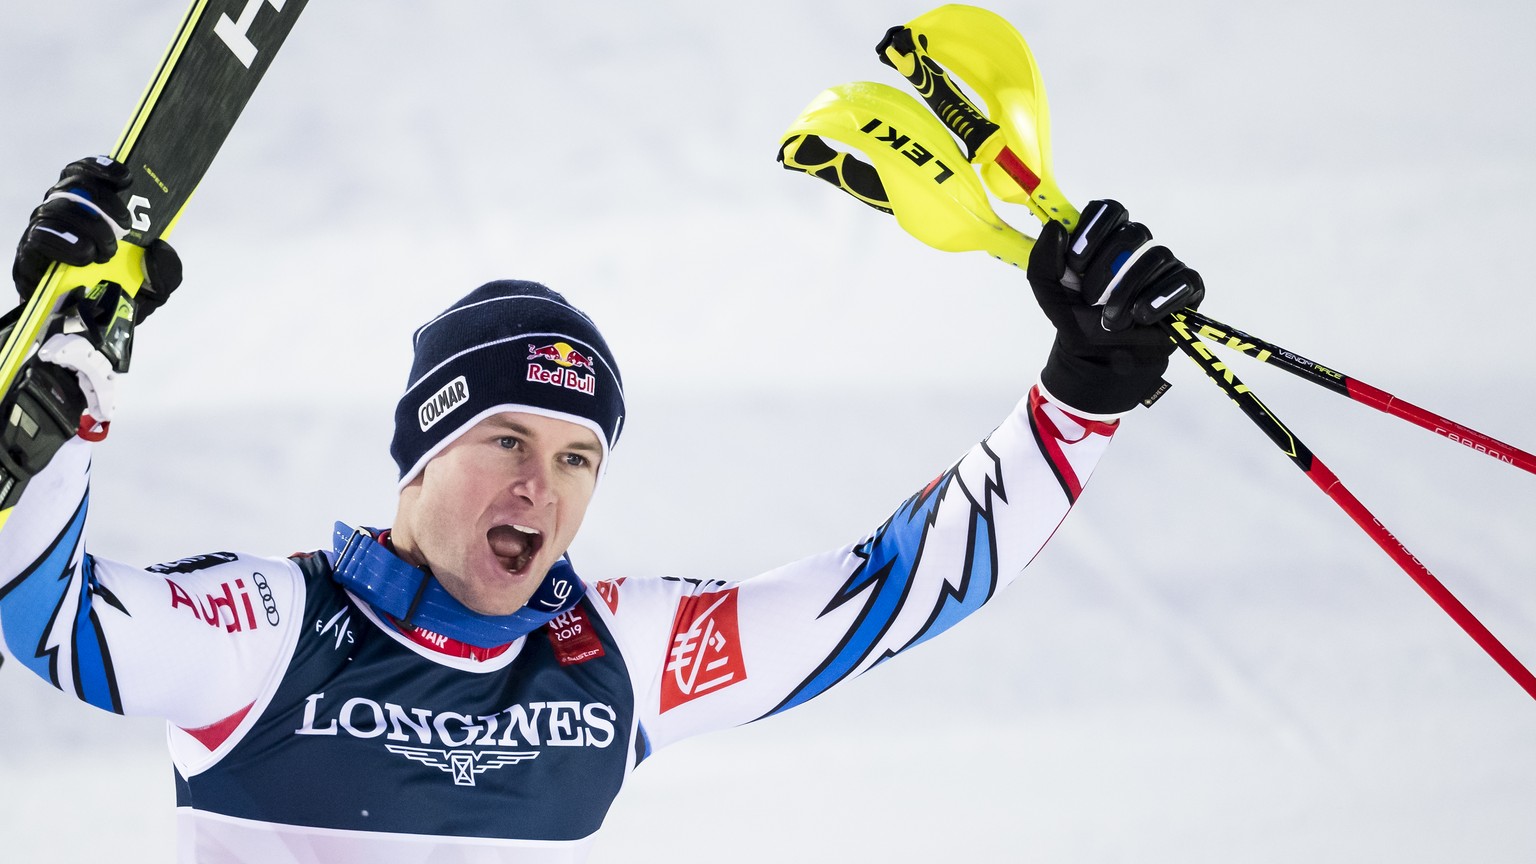 Alexis Pinturault of France, gold medal, reacts in the finish area during the men slalom race of the Alpine Combined at the 2019 FIS Alpine Skiing World Championships in Are, Sweden Monday, February 1 ...